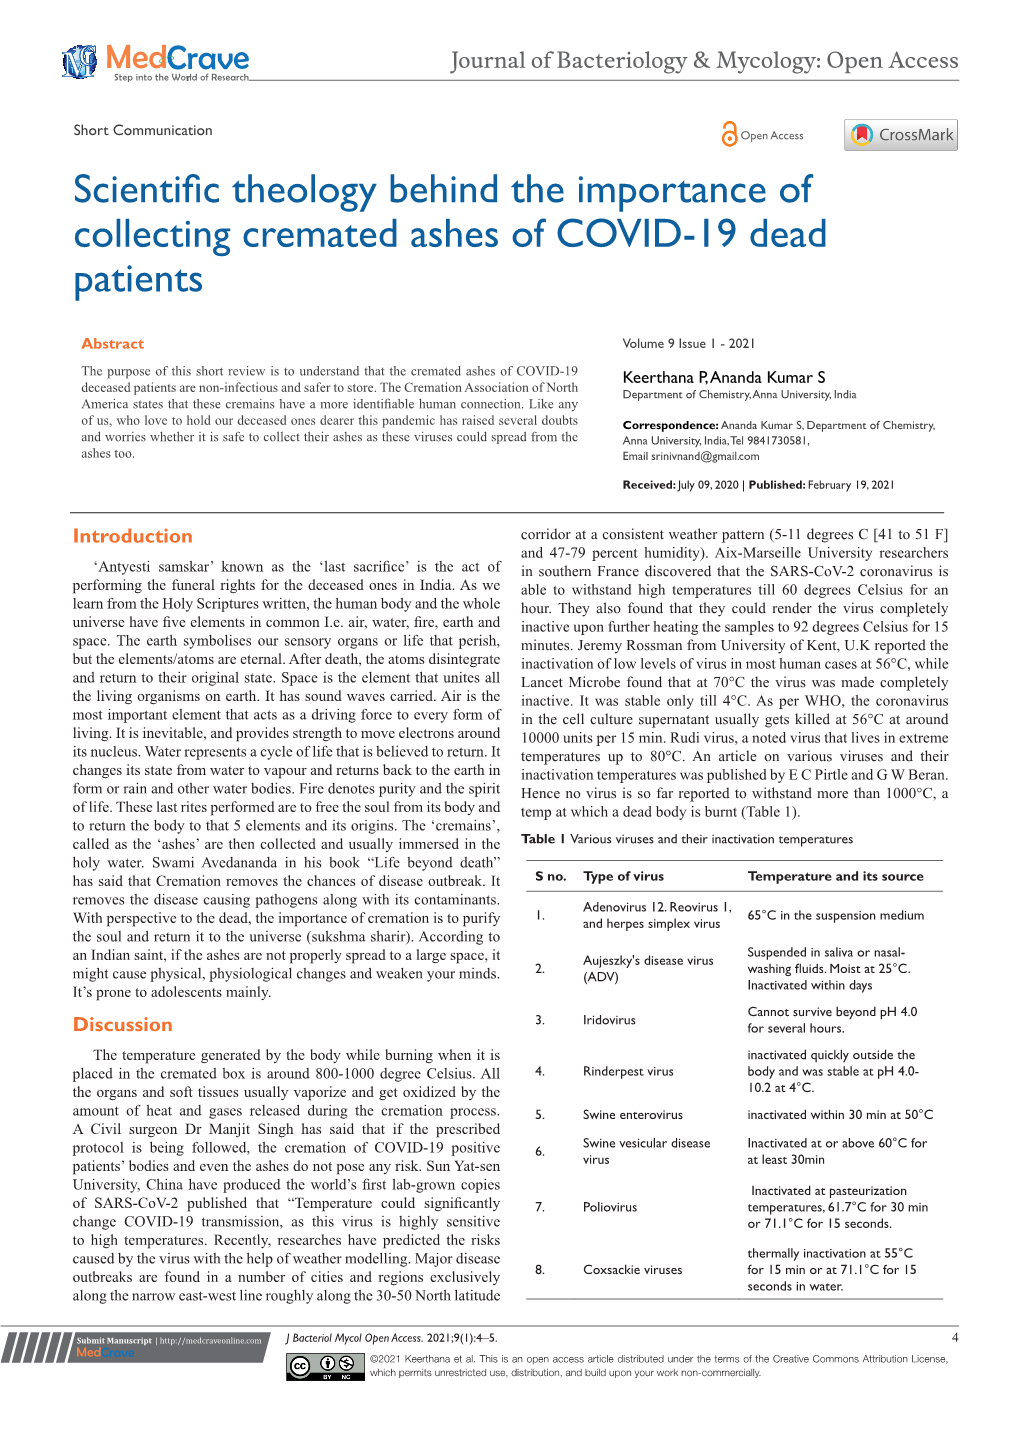 Scientific Theology Behind the Importance of Collecting Cremated Ashes of COVID-19 Dead Patients